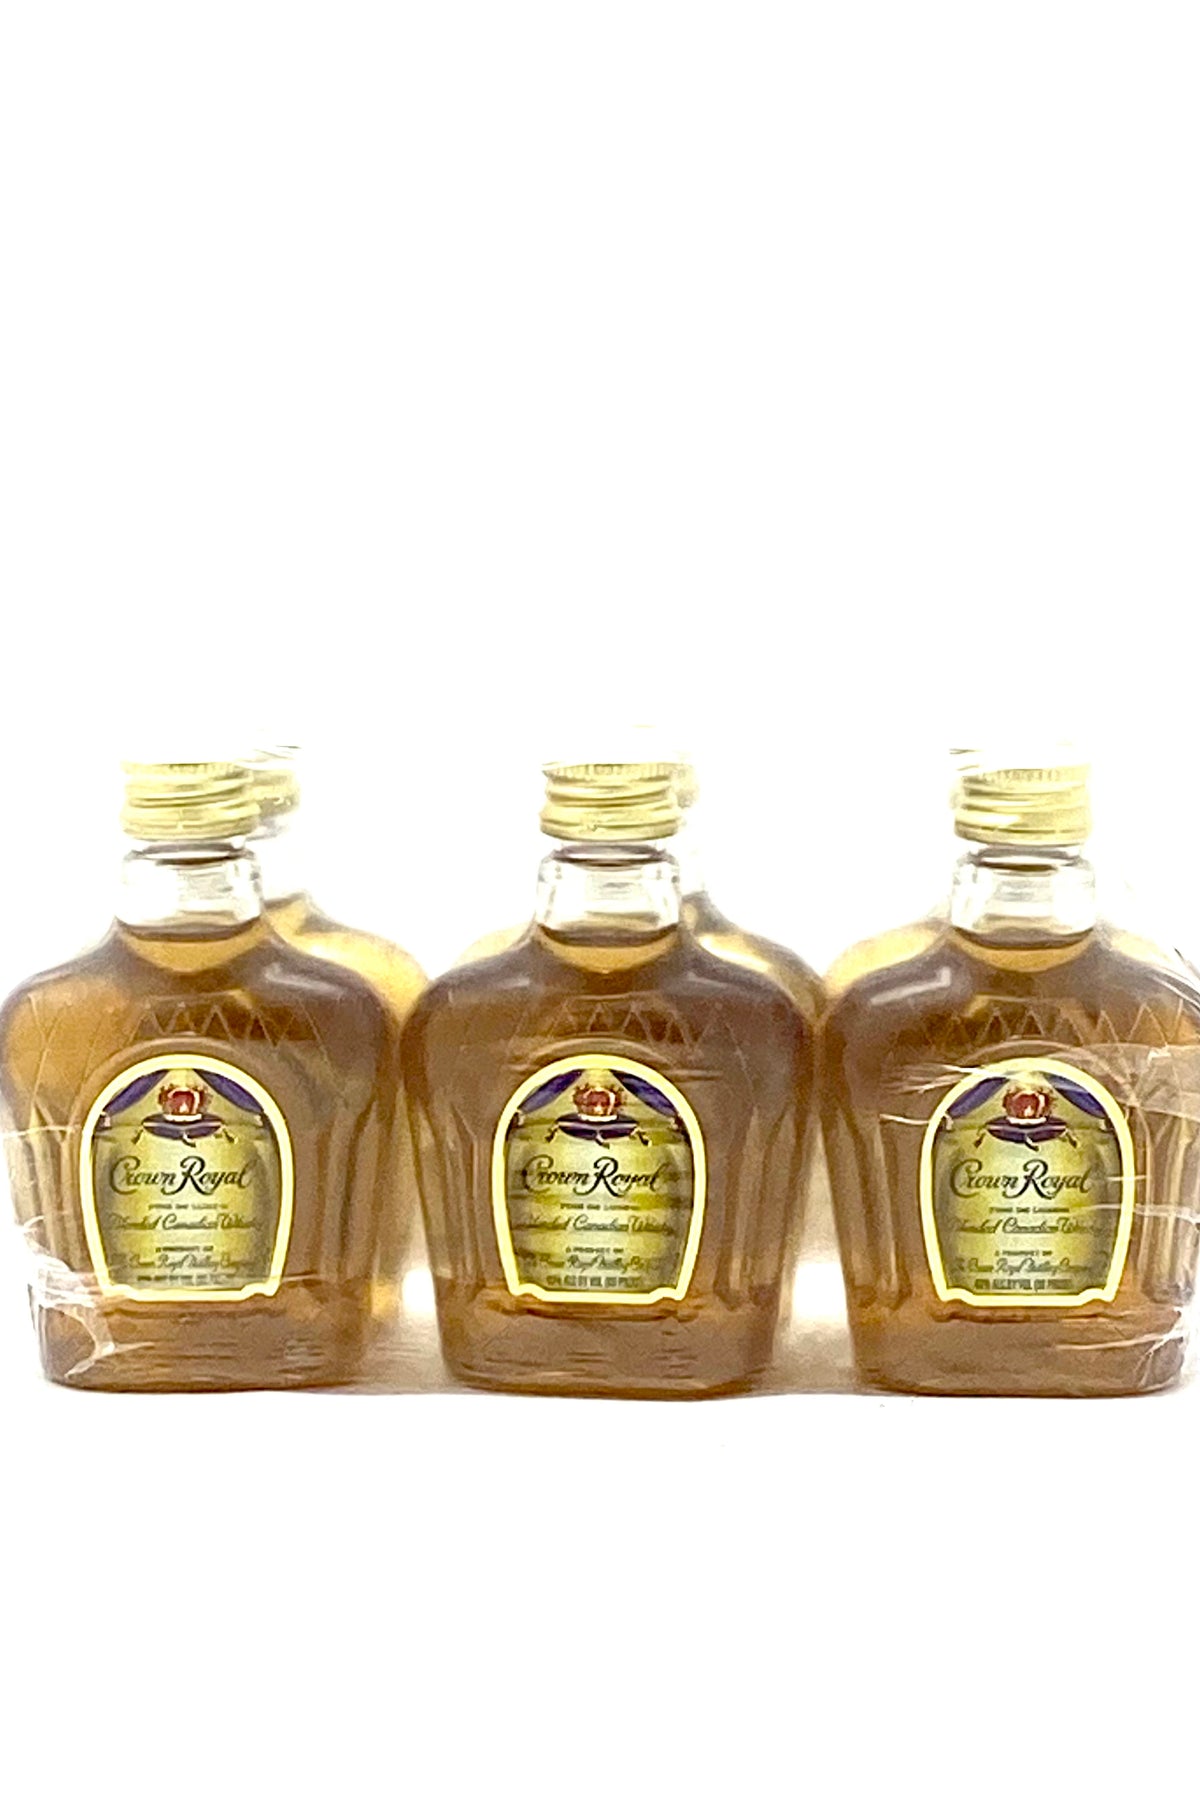 Crown Royal Canadian Whisky 6 x 50 ml